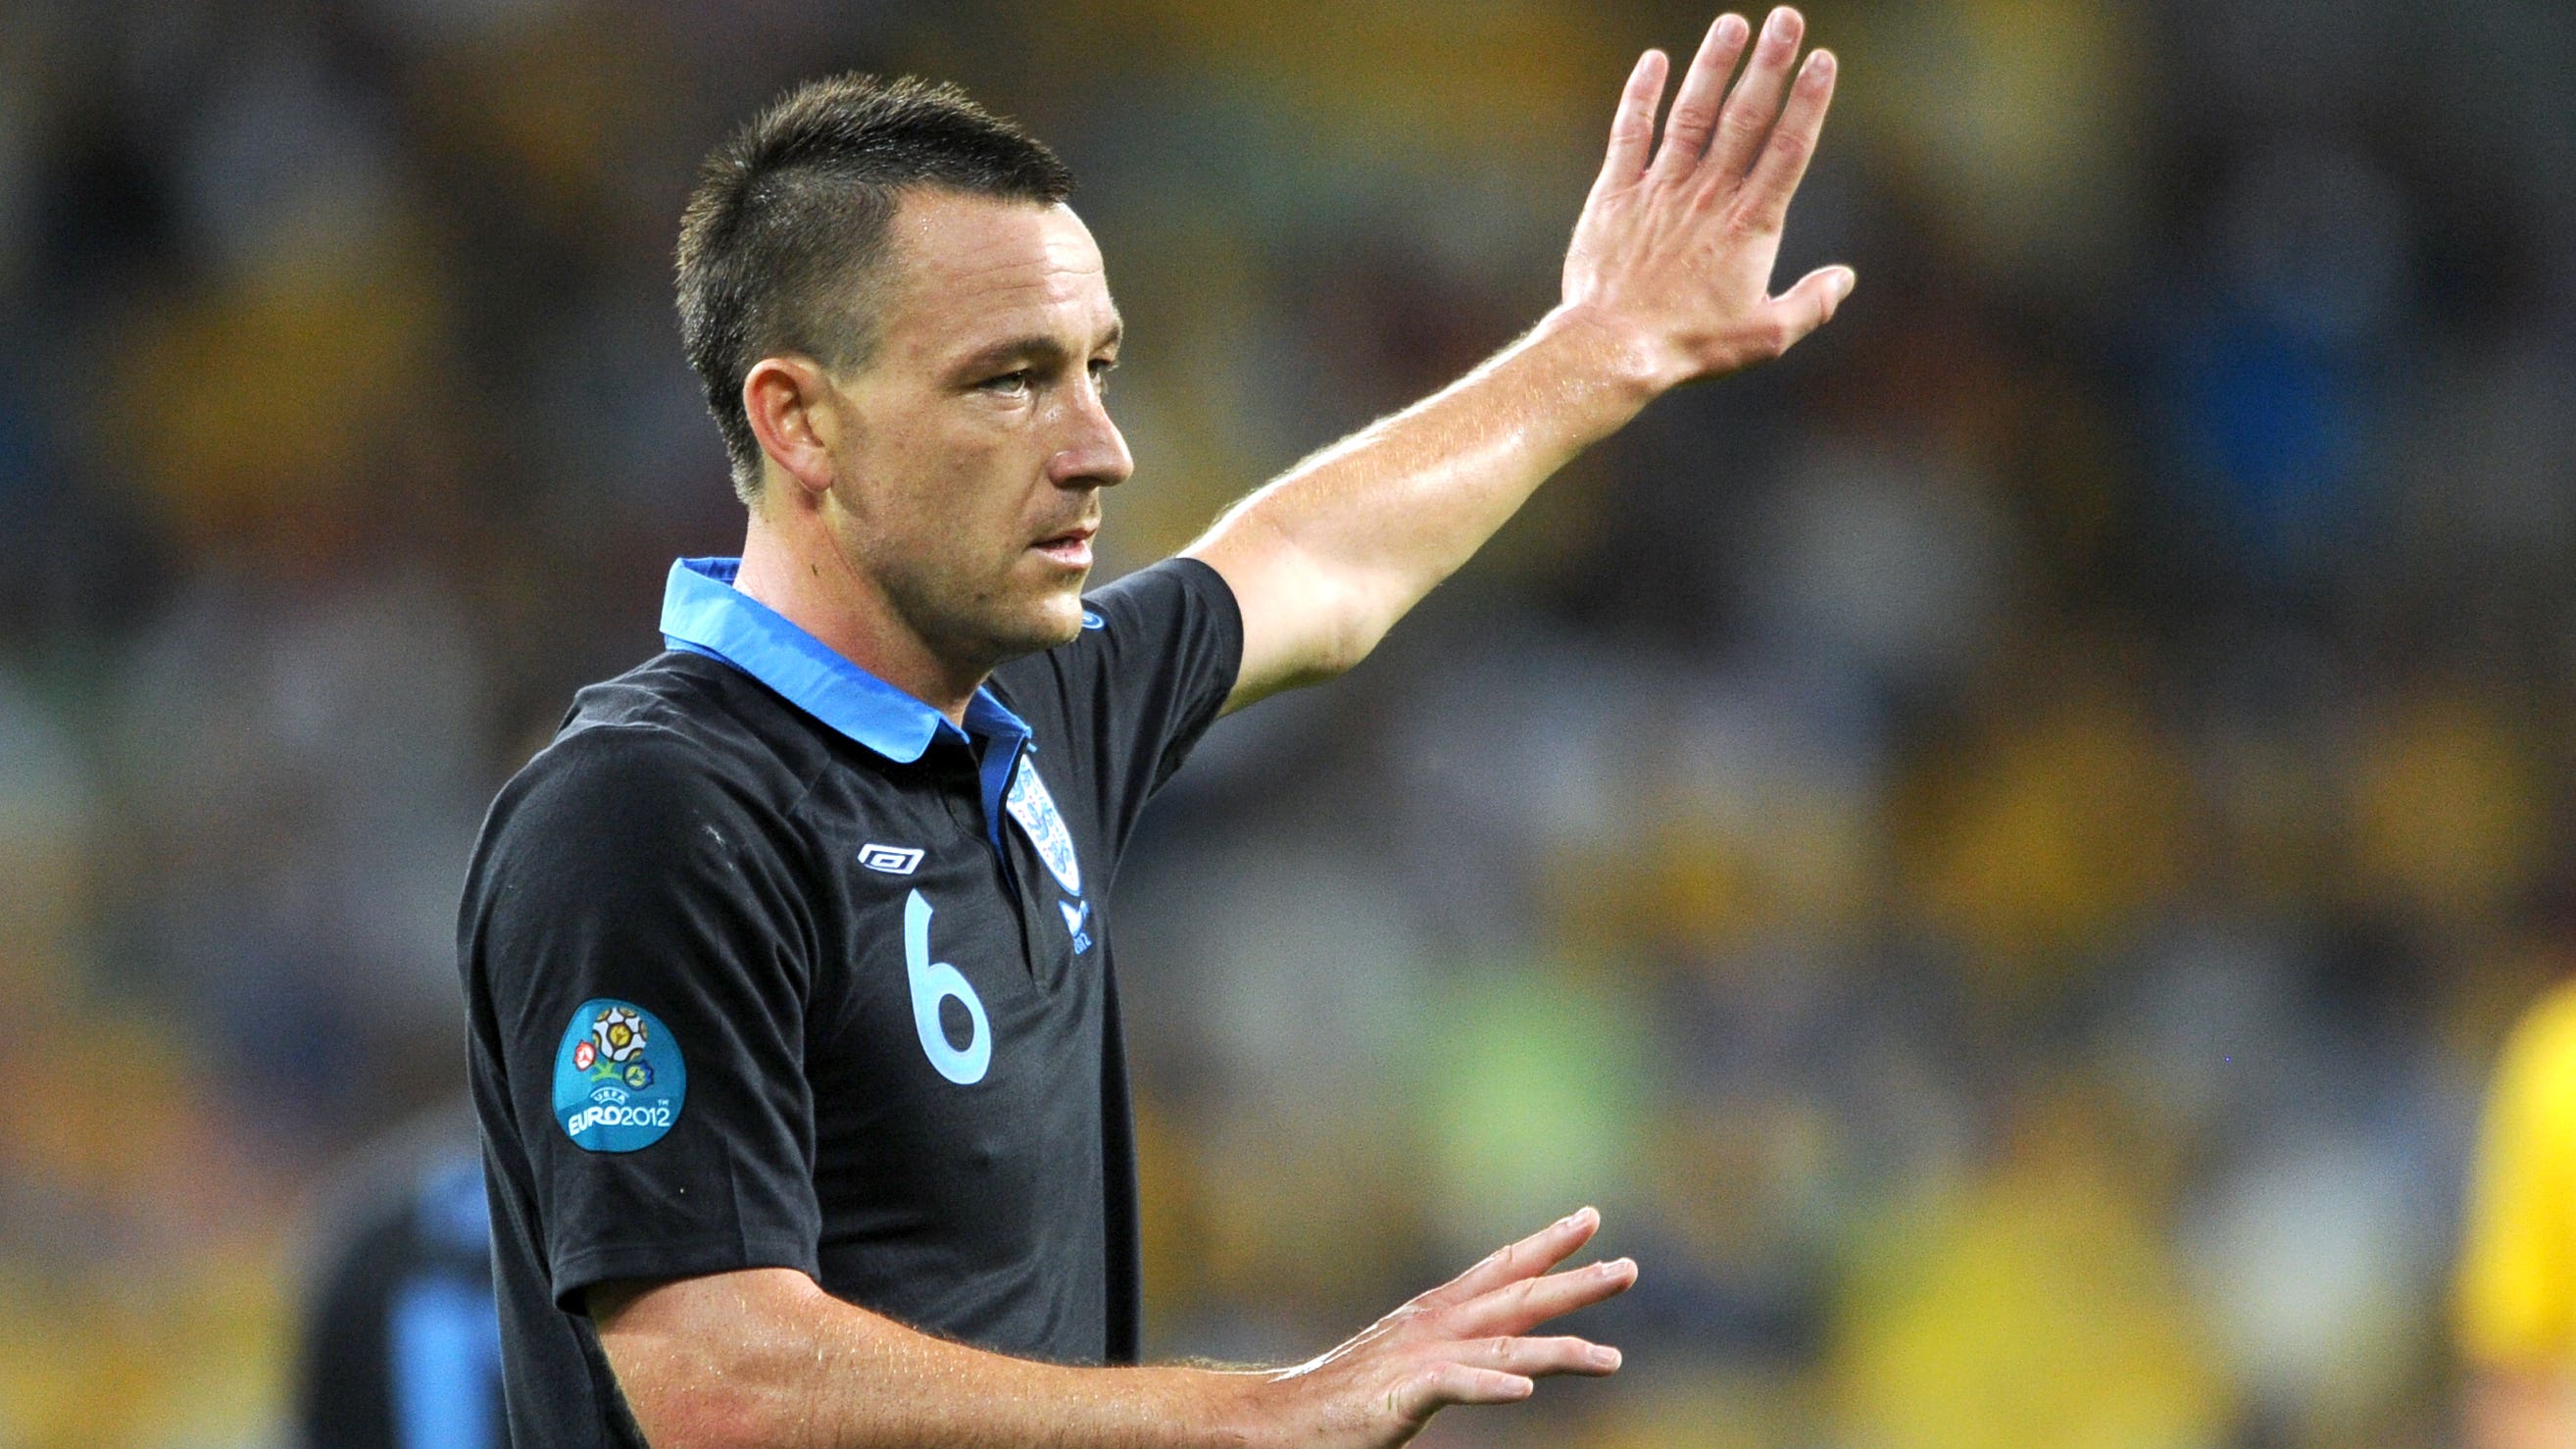 On this day in 2012: Ex-England captain John Terry quits international football | BT Sport